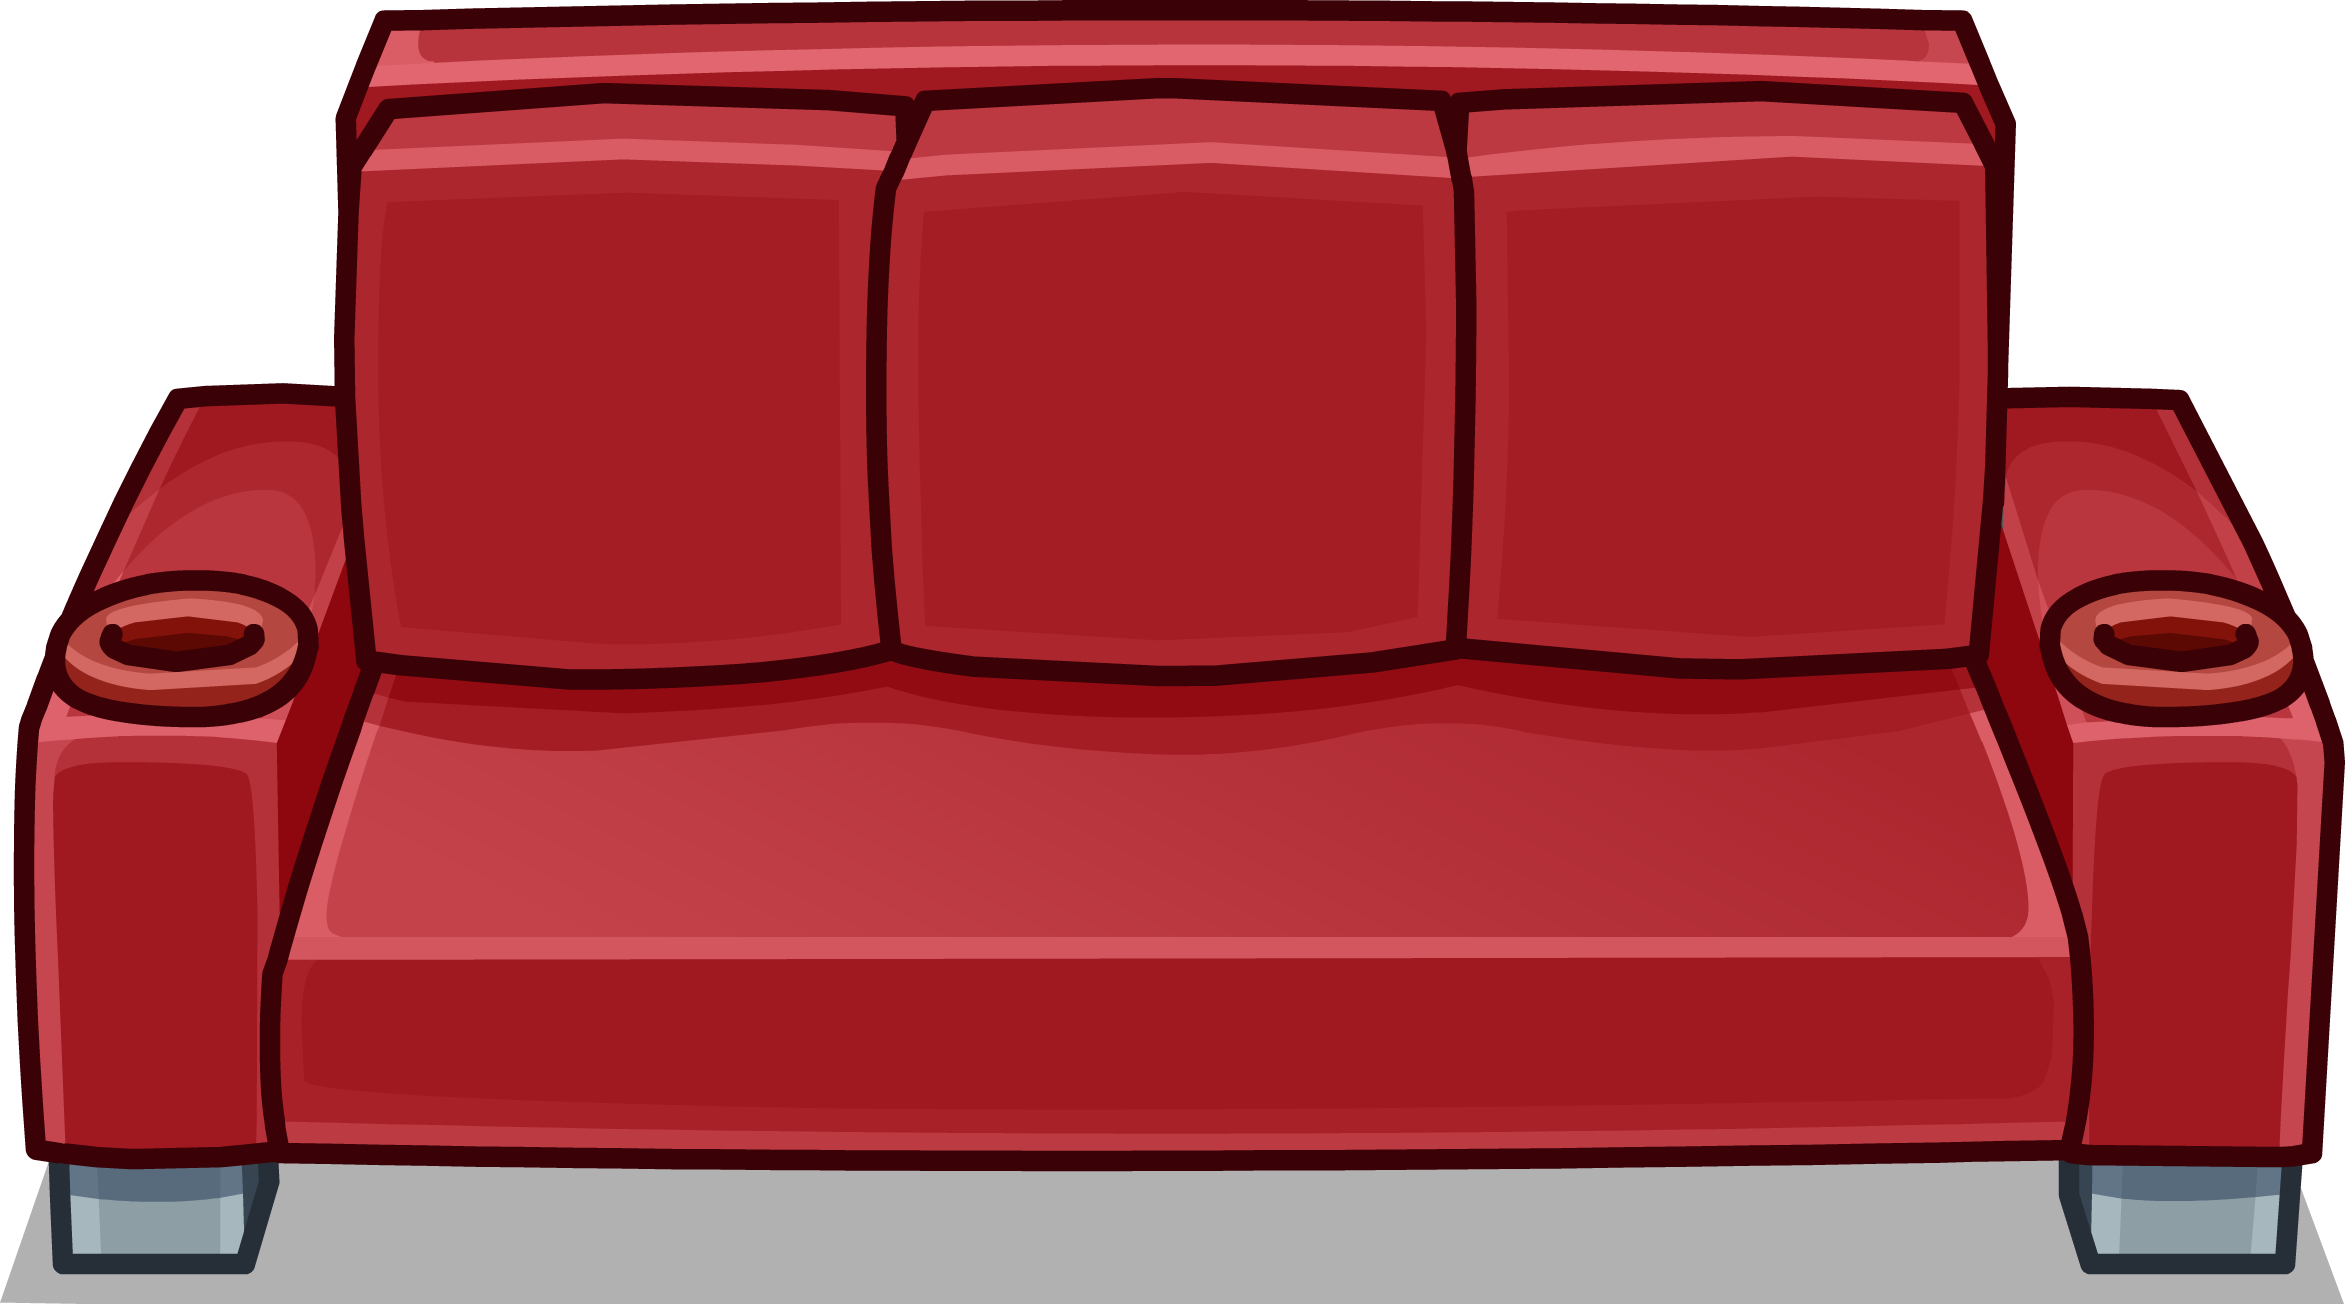 furniture clipart red couch